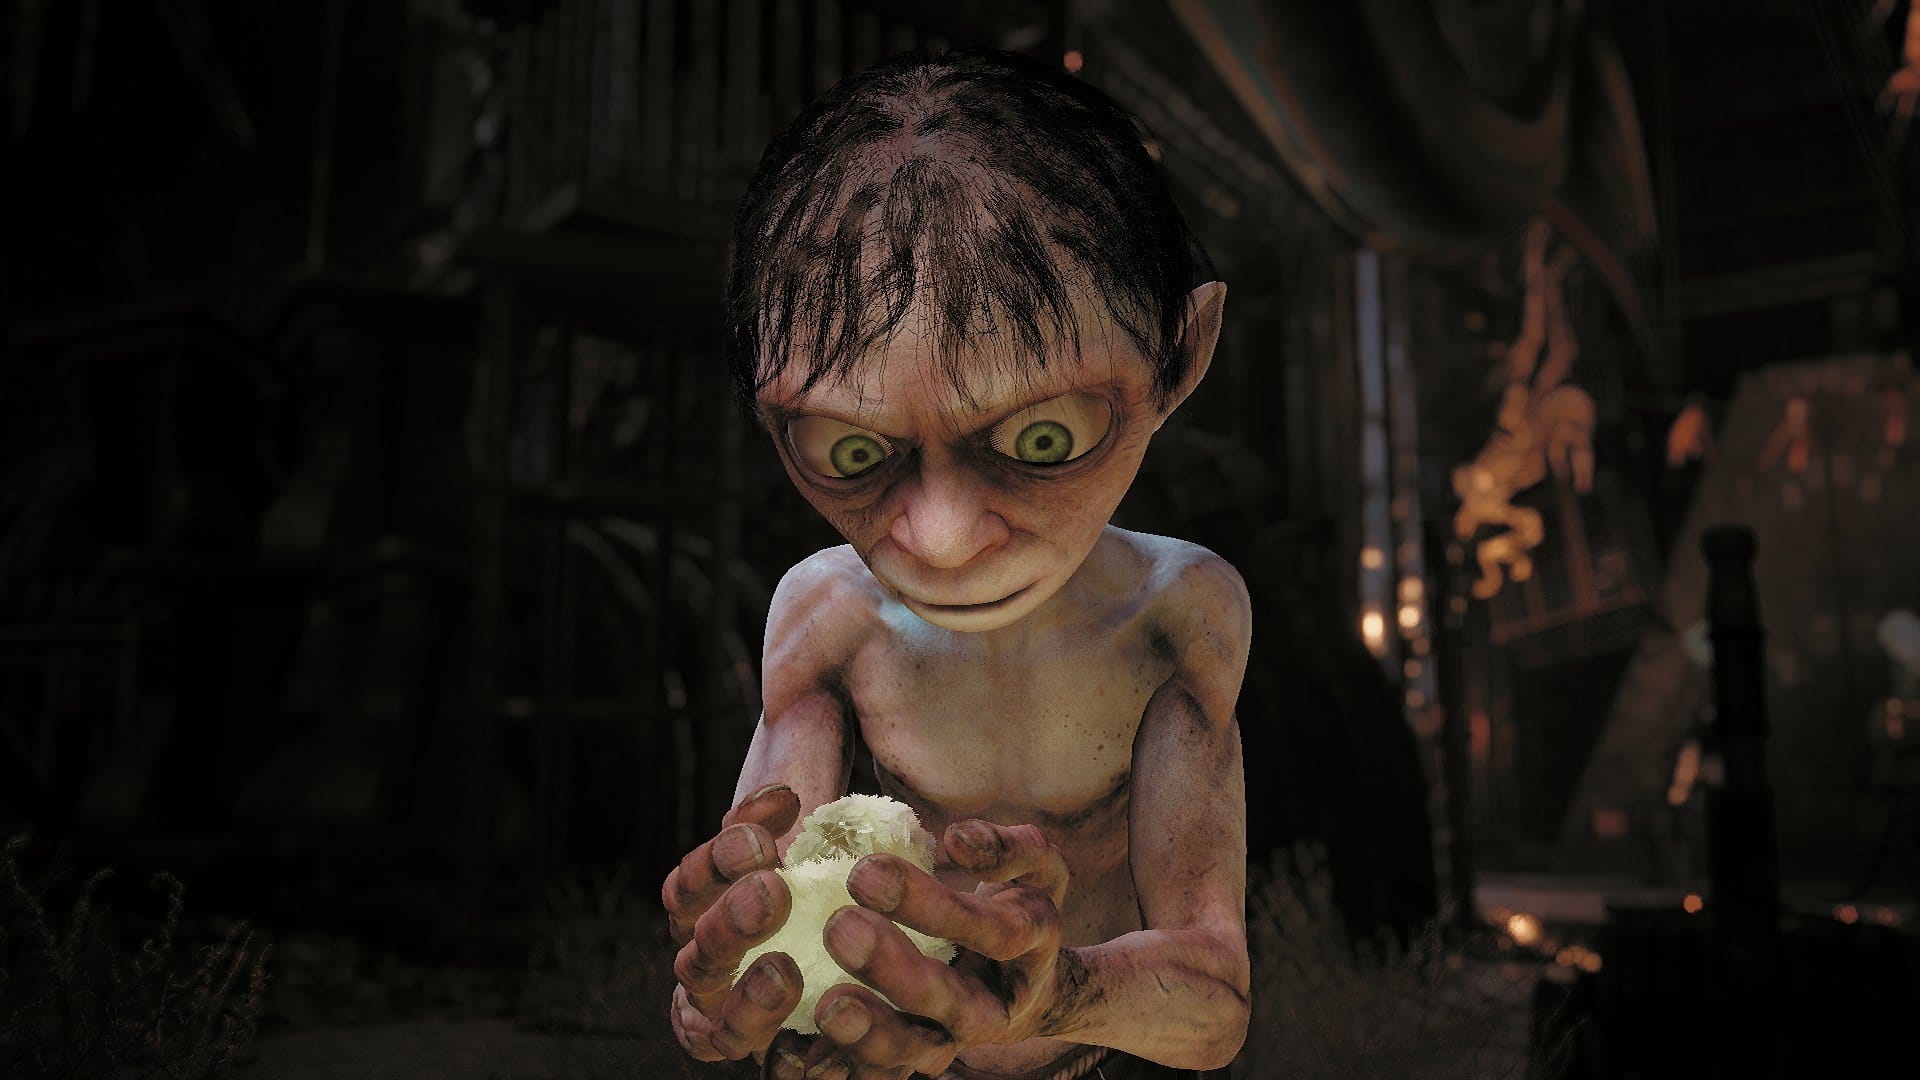 The Lord of the Rings: Gollum Developer Apologizes for “Underwhelming”  Launch